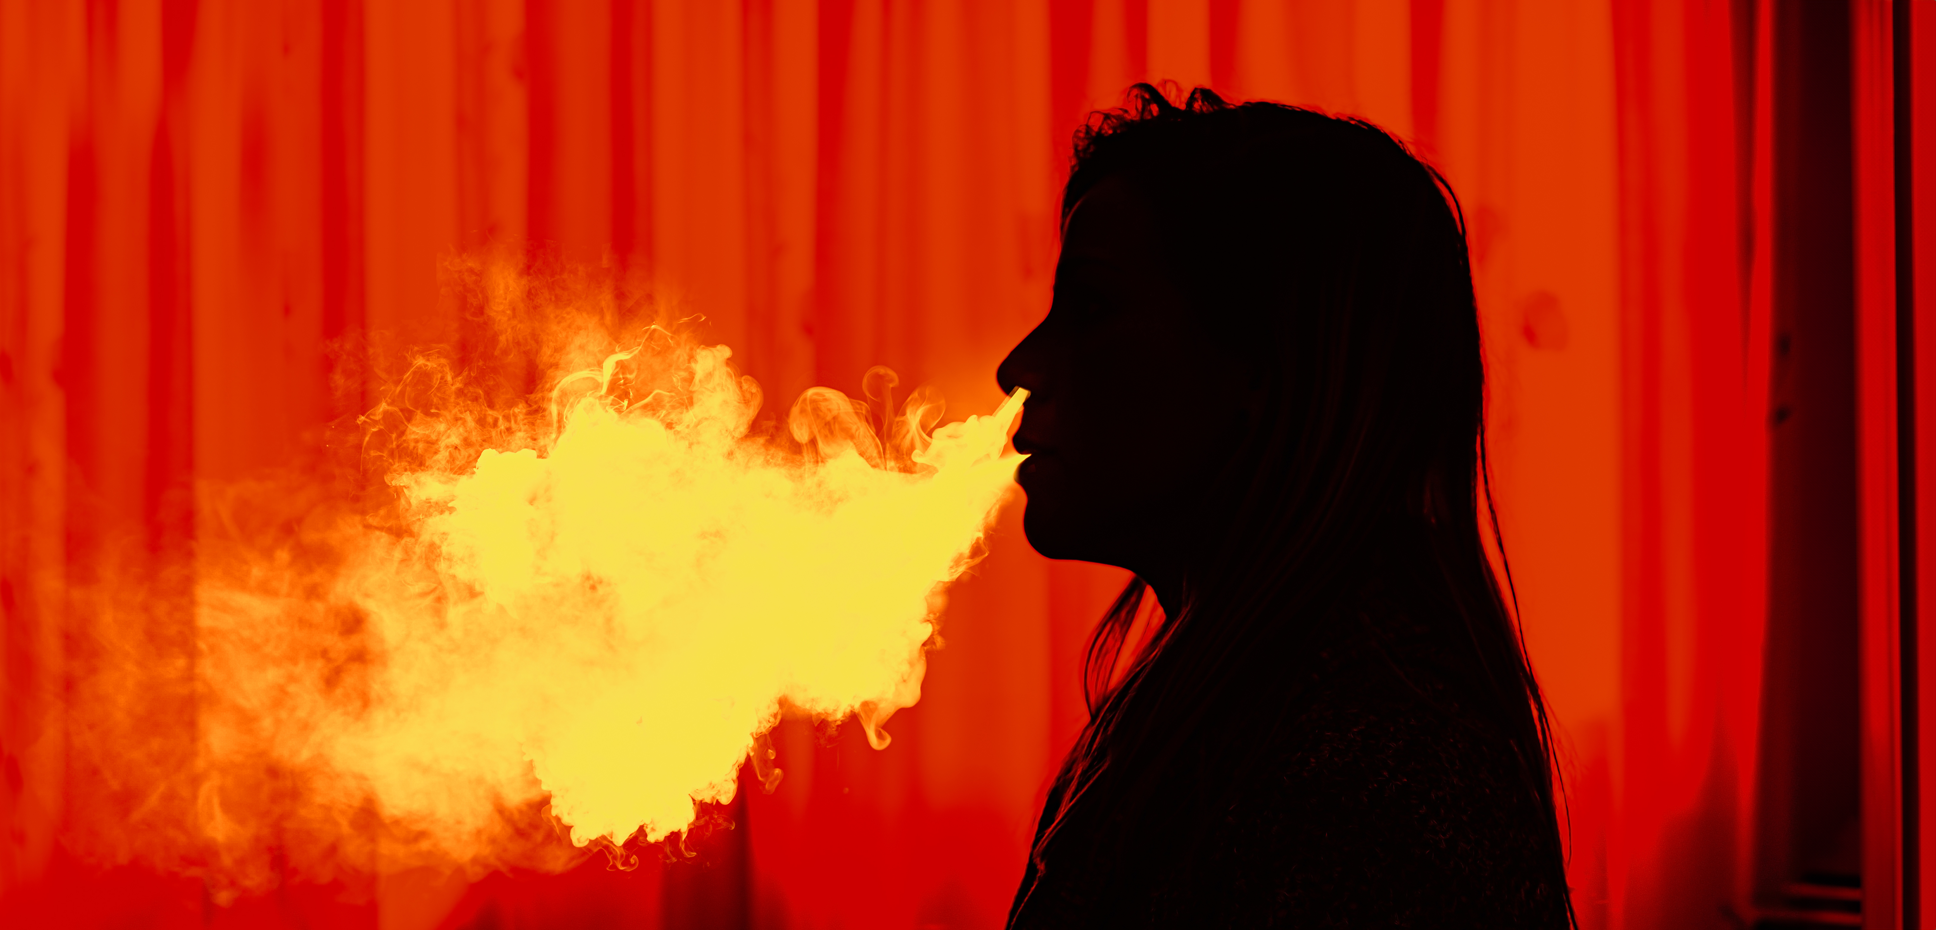 Silhouette of a woman exhaling vape smoke against a red background